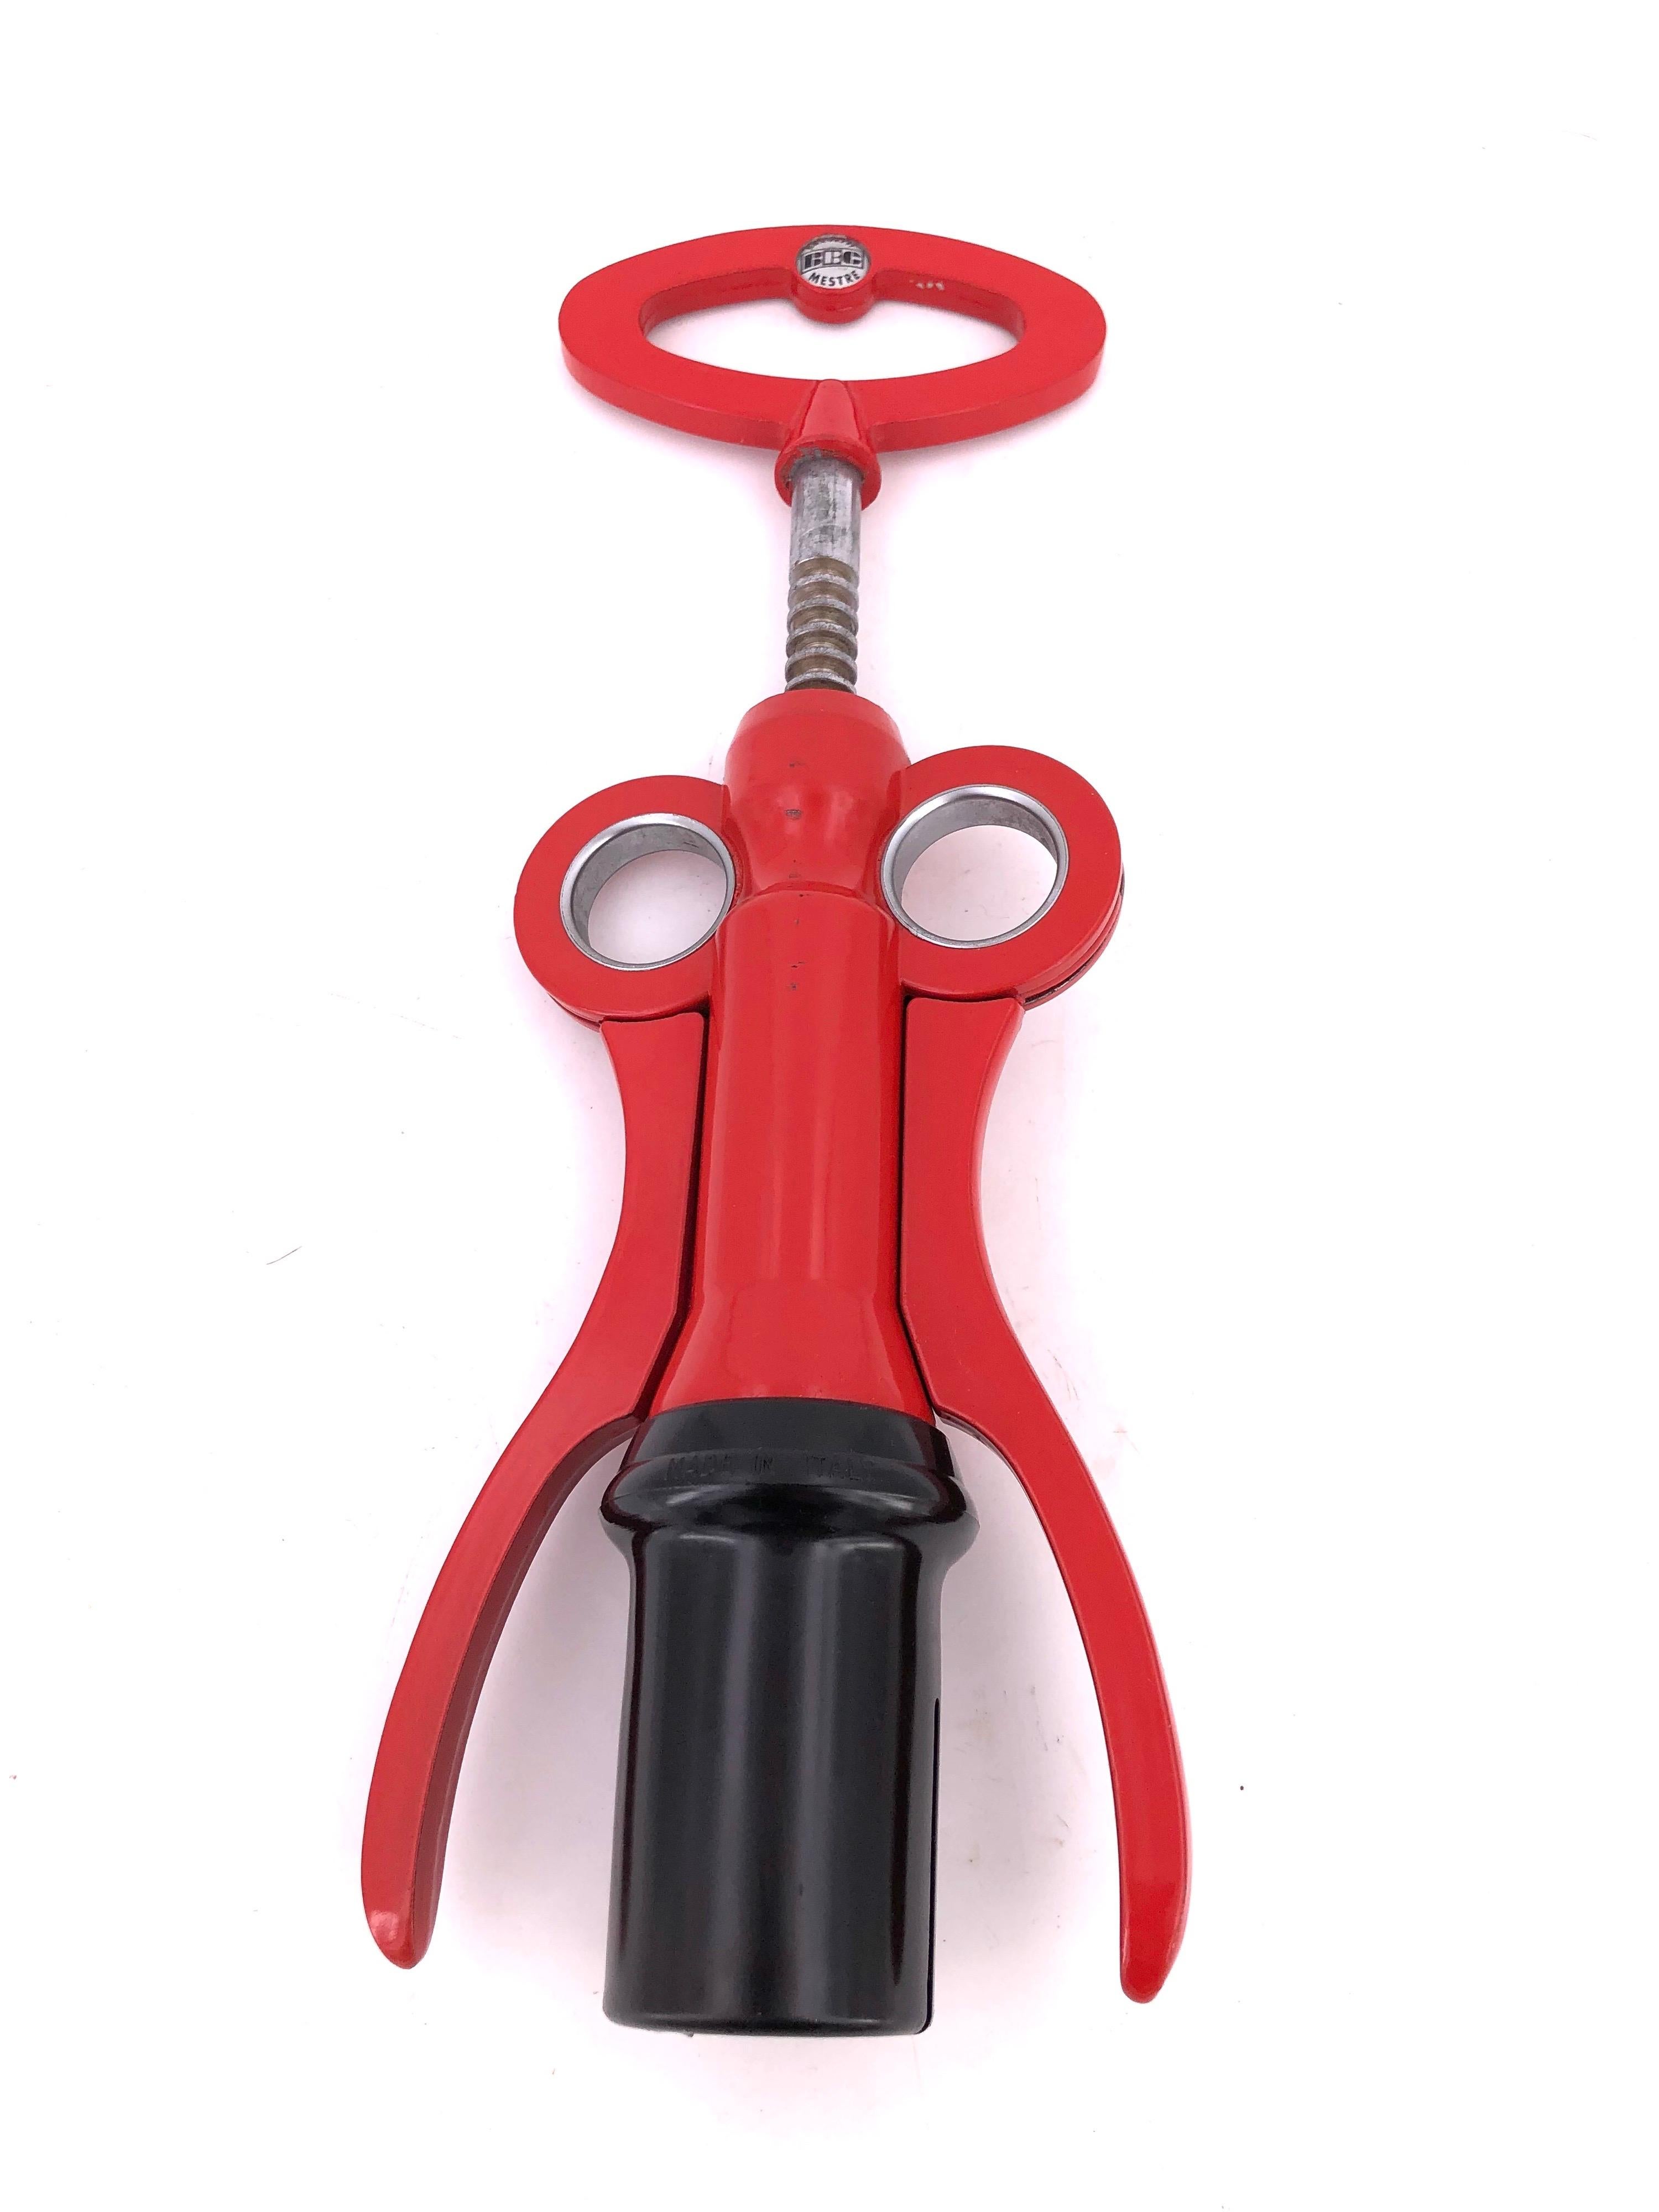 Giant large double leveler corkscrew, circa 1980s nice red color beautiful industrial design.